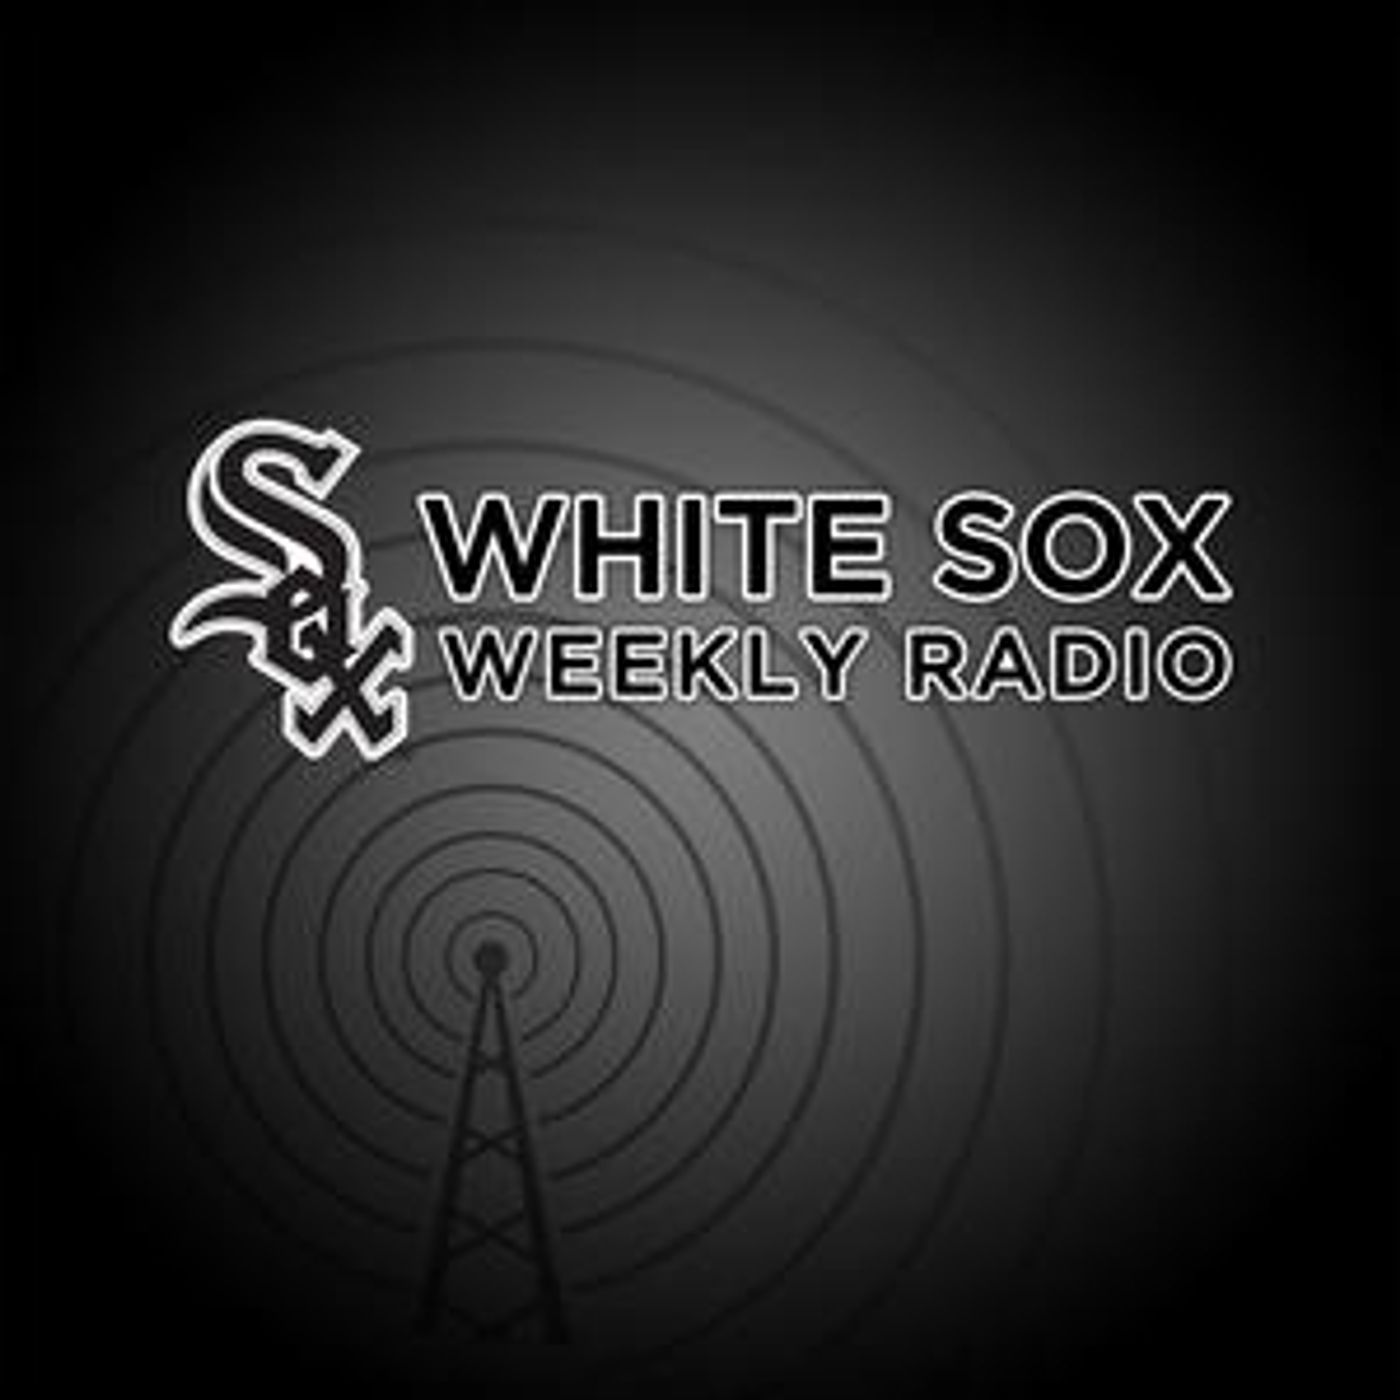 White Sox Weekly (06-10-17) Hour 1